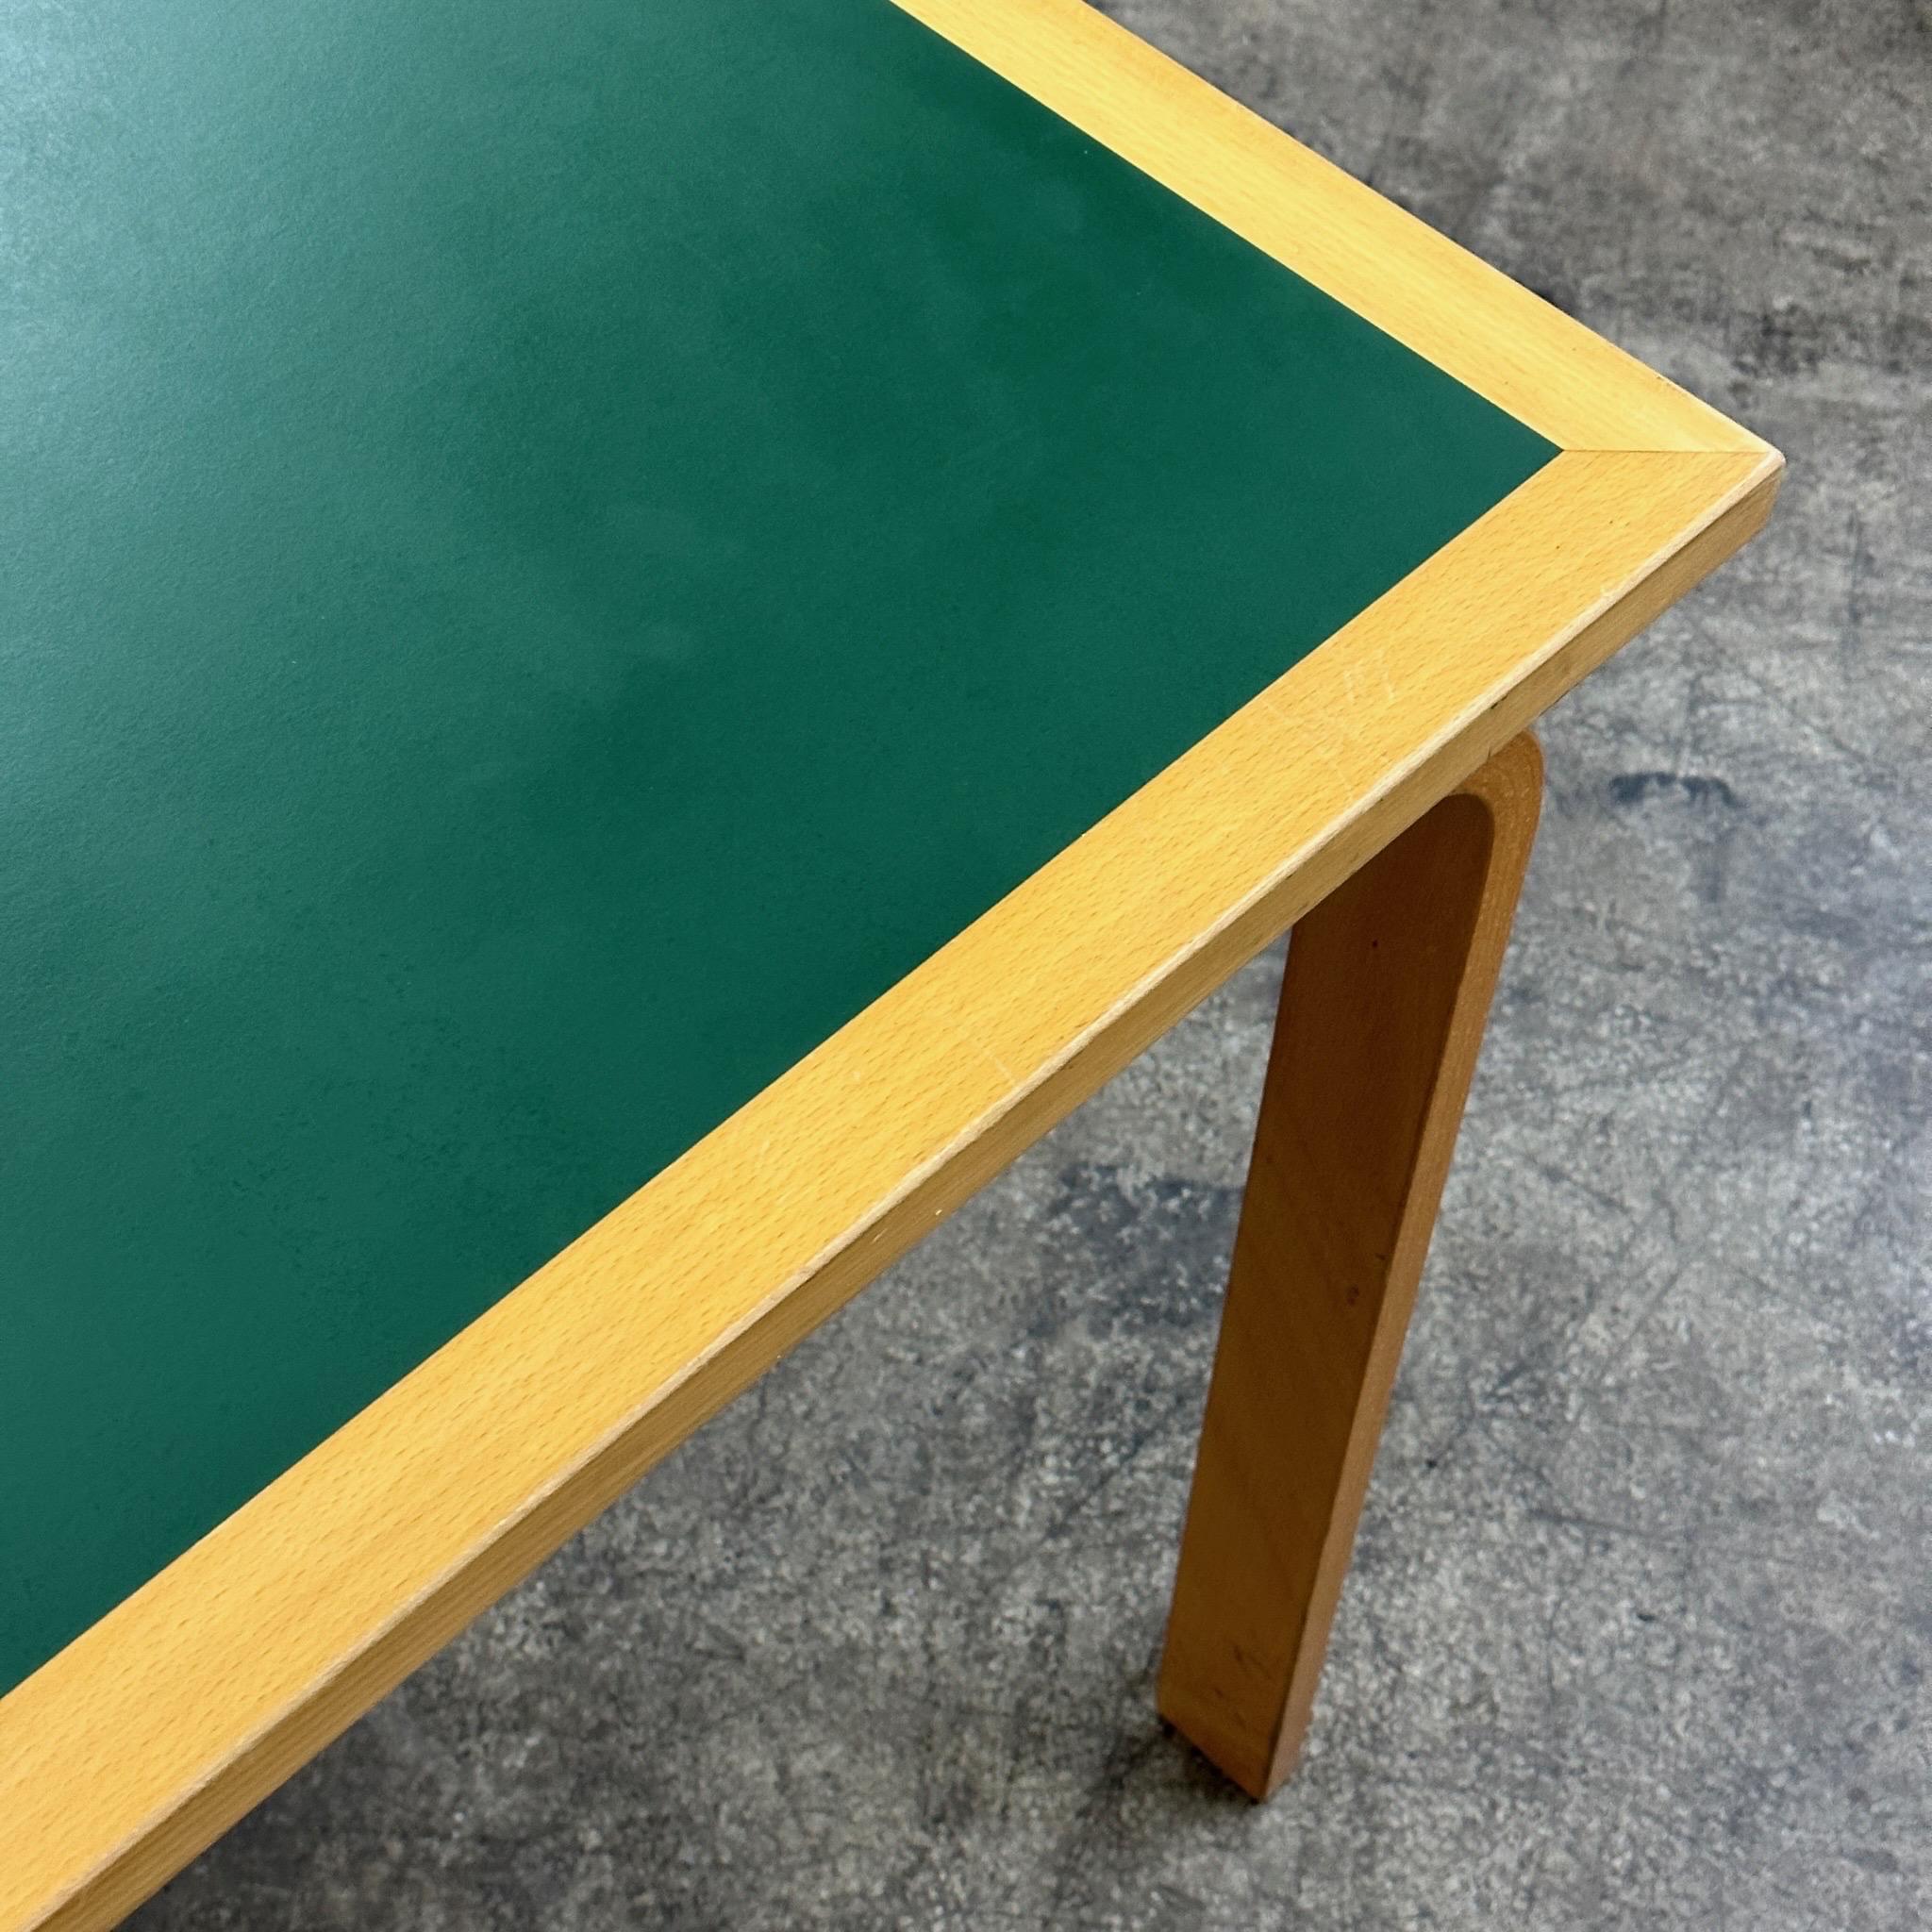 Green Linoleum Table/Desk by Rud Thygesen and Johnny Sørensen for Magnus Olesen In Good Condition For Sale In Chicago, IL